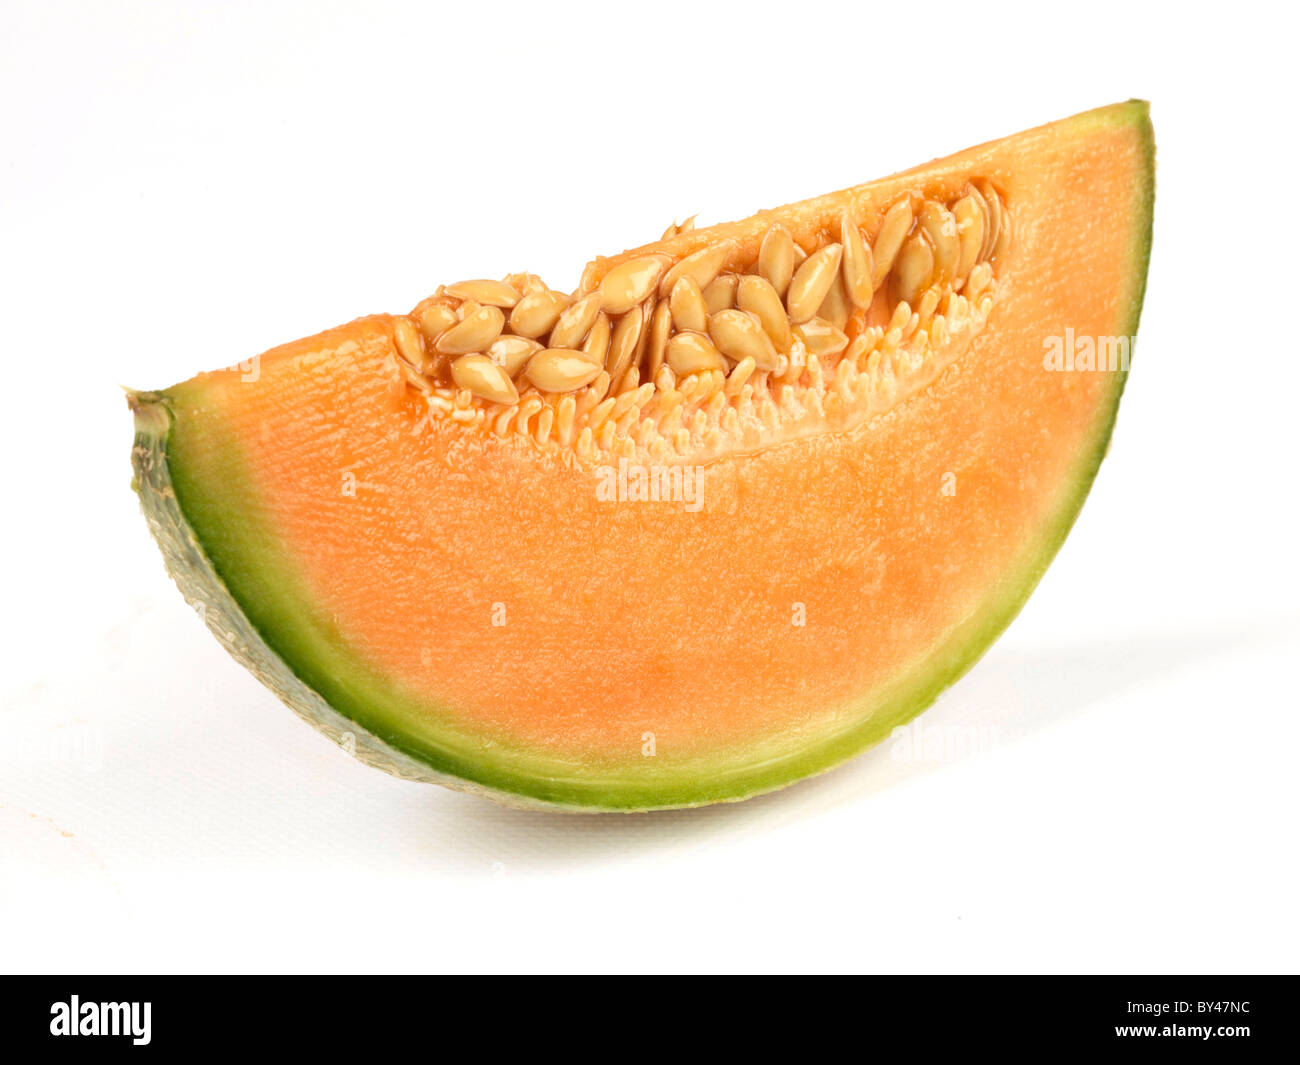 Freshly Cut Segments of A Fresh Healthy Orange Cantaloupe Melon In Close Up Against A White Background With Copy Space And No People Stock Photo